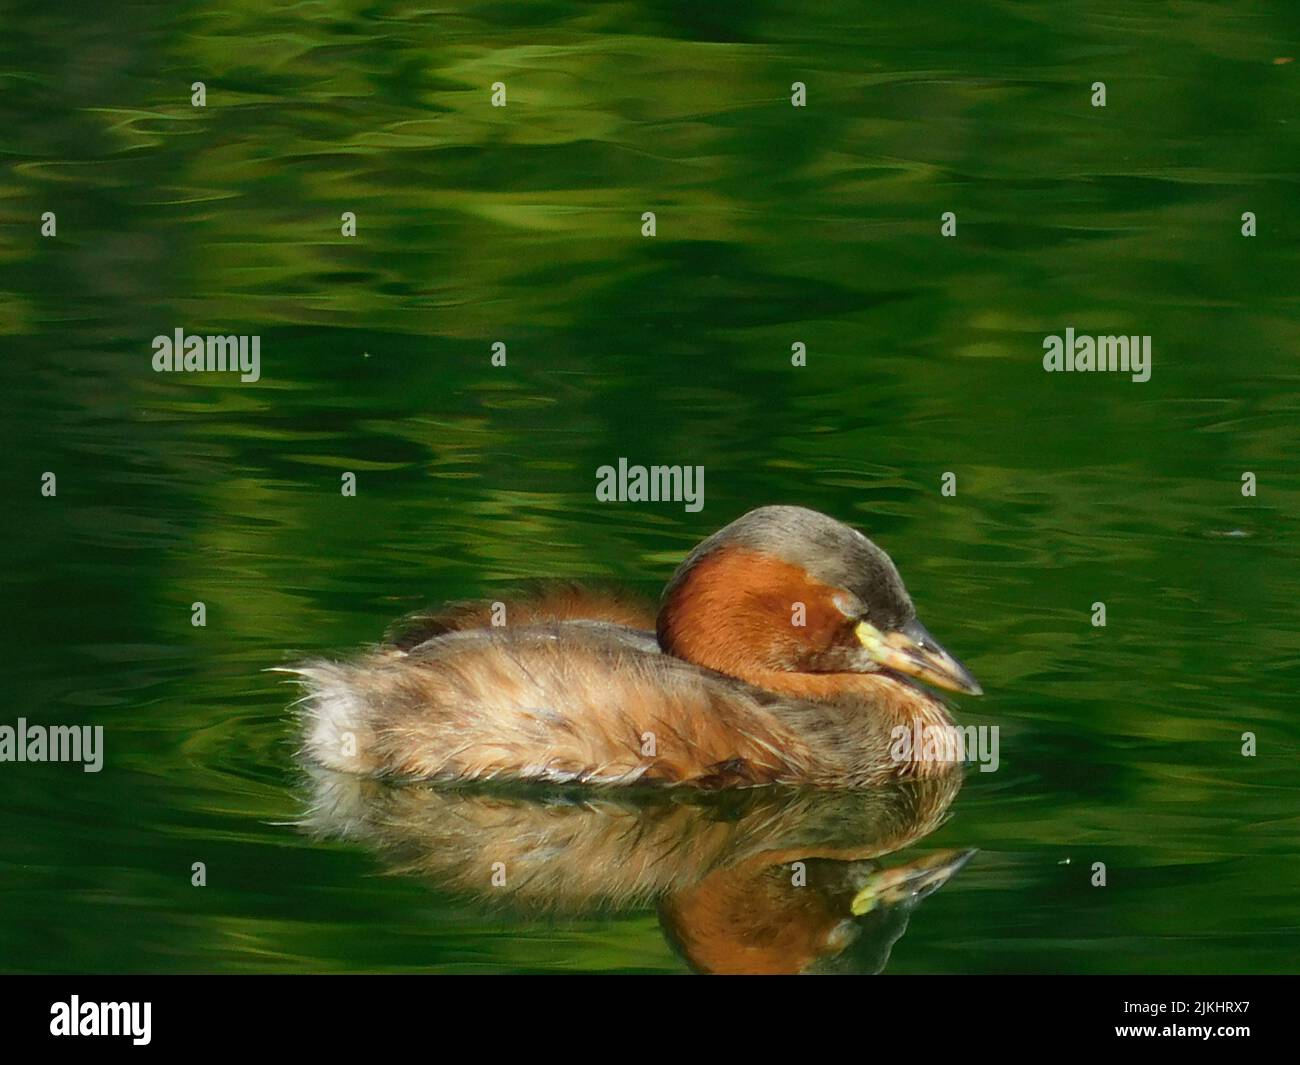 A close up of  little grebe (Tachybaptus ruficollis) in a green colored water Stock Photo